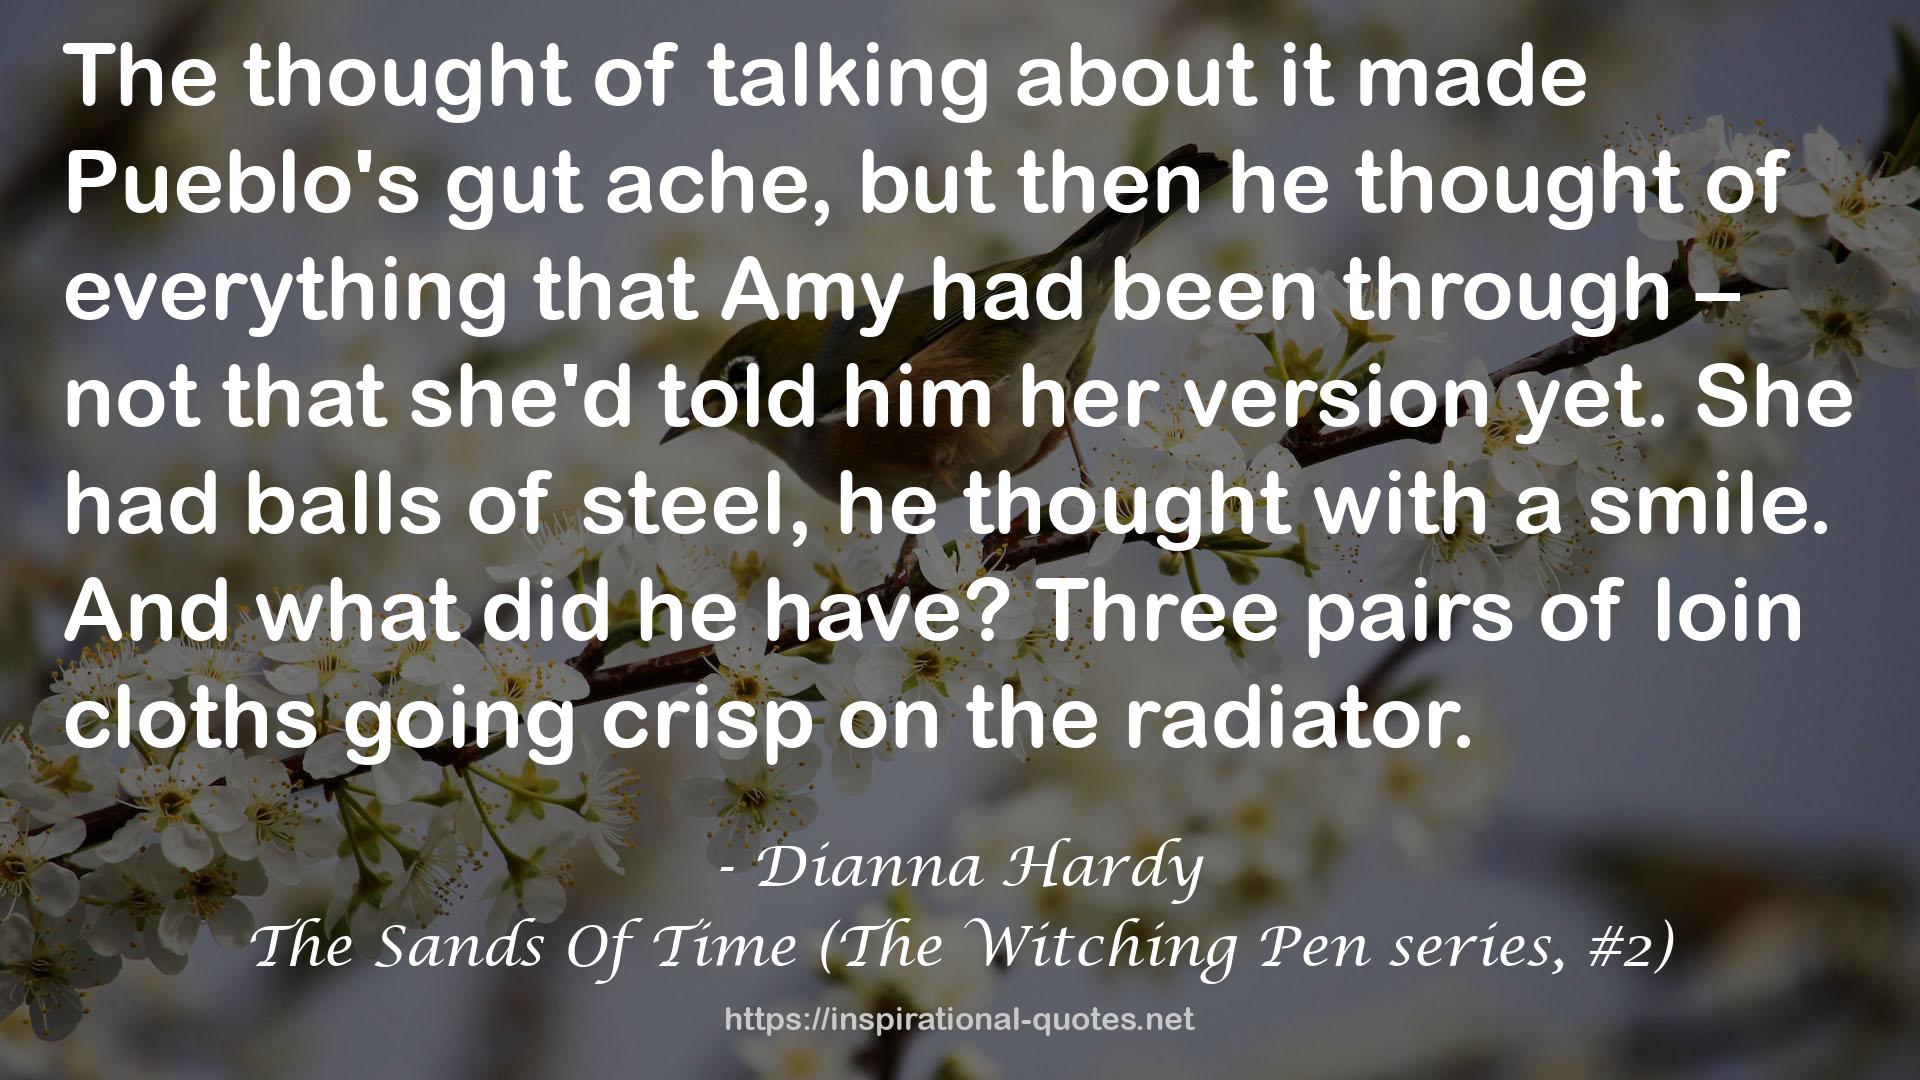 The Sands Of Time (The Witching Pen series, #2) QUOTES